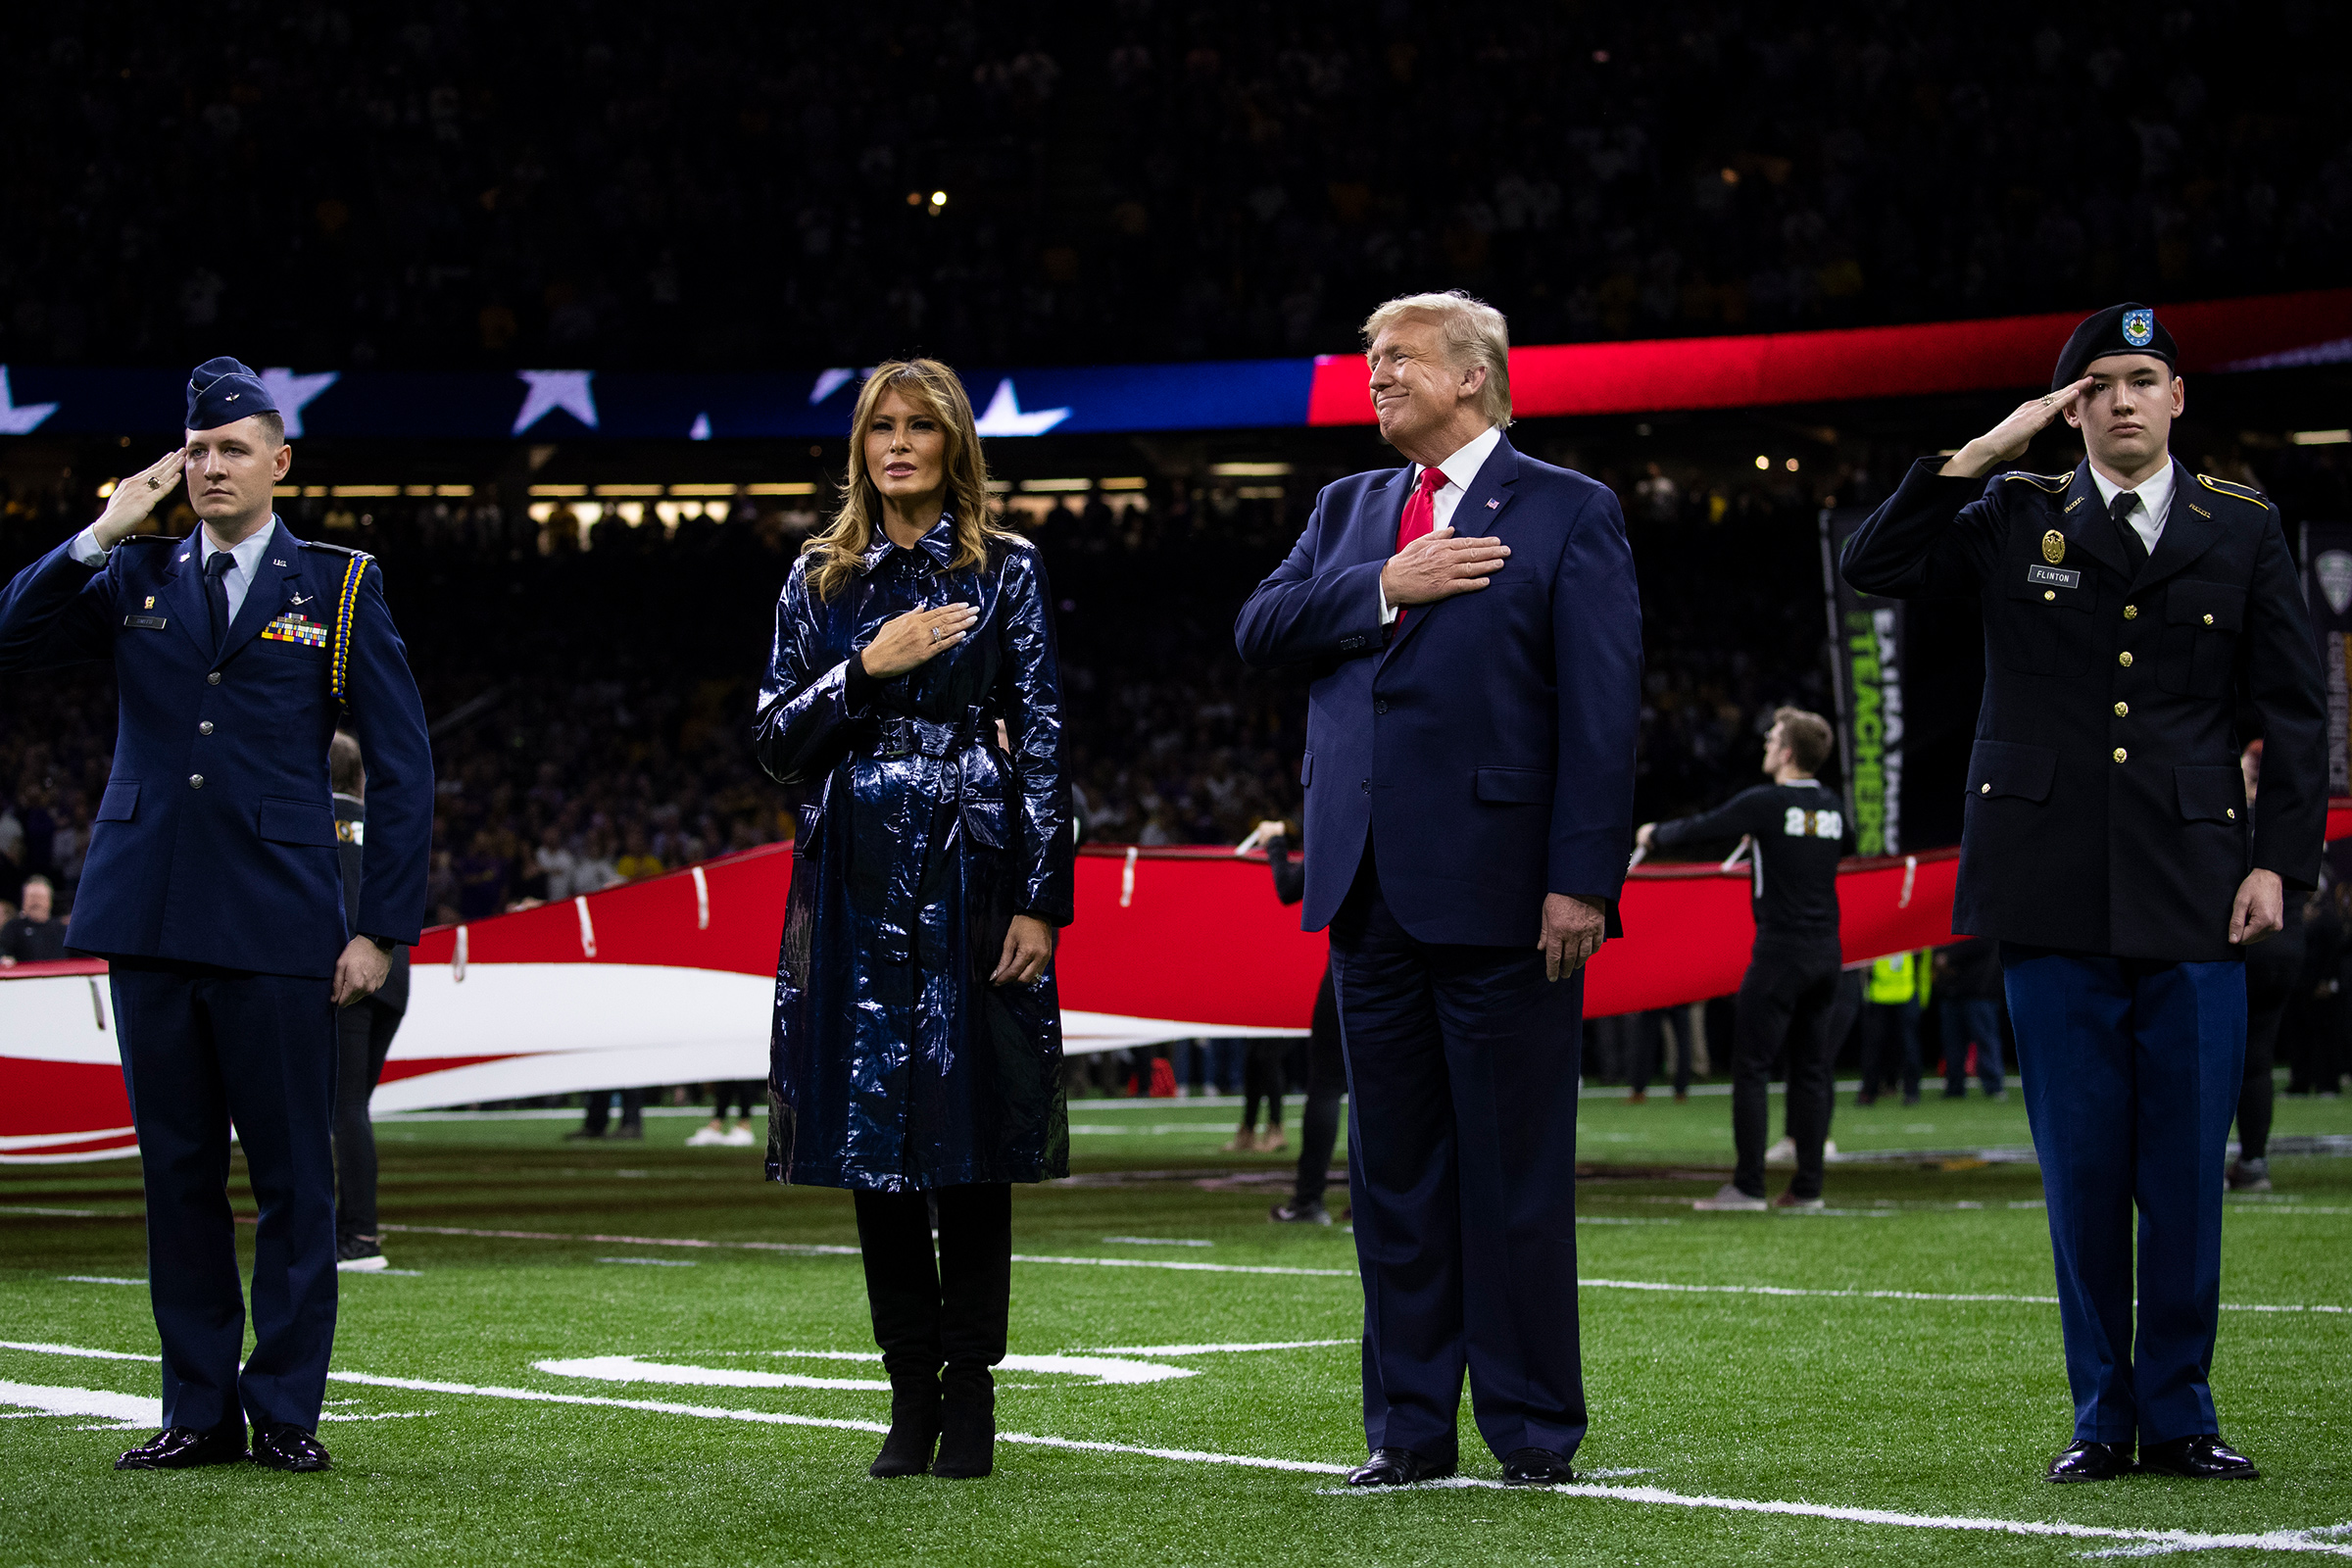 President Donald Trump and first lady Melania Trump stand for the national anthem before the beginning of the College Football Playoff National Championship game on Jan. 13 in New Orleans (Evan Vucci—AP)